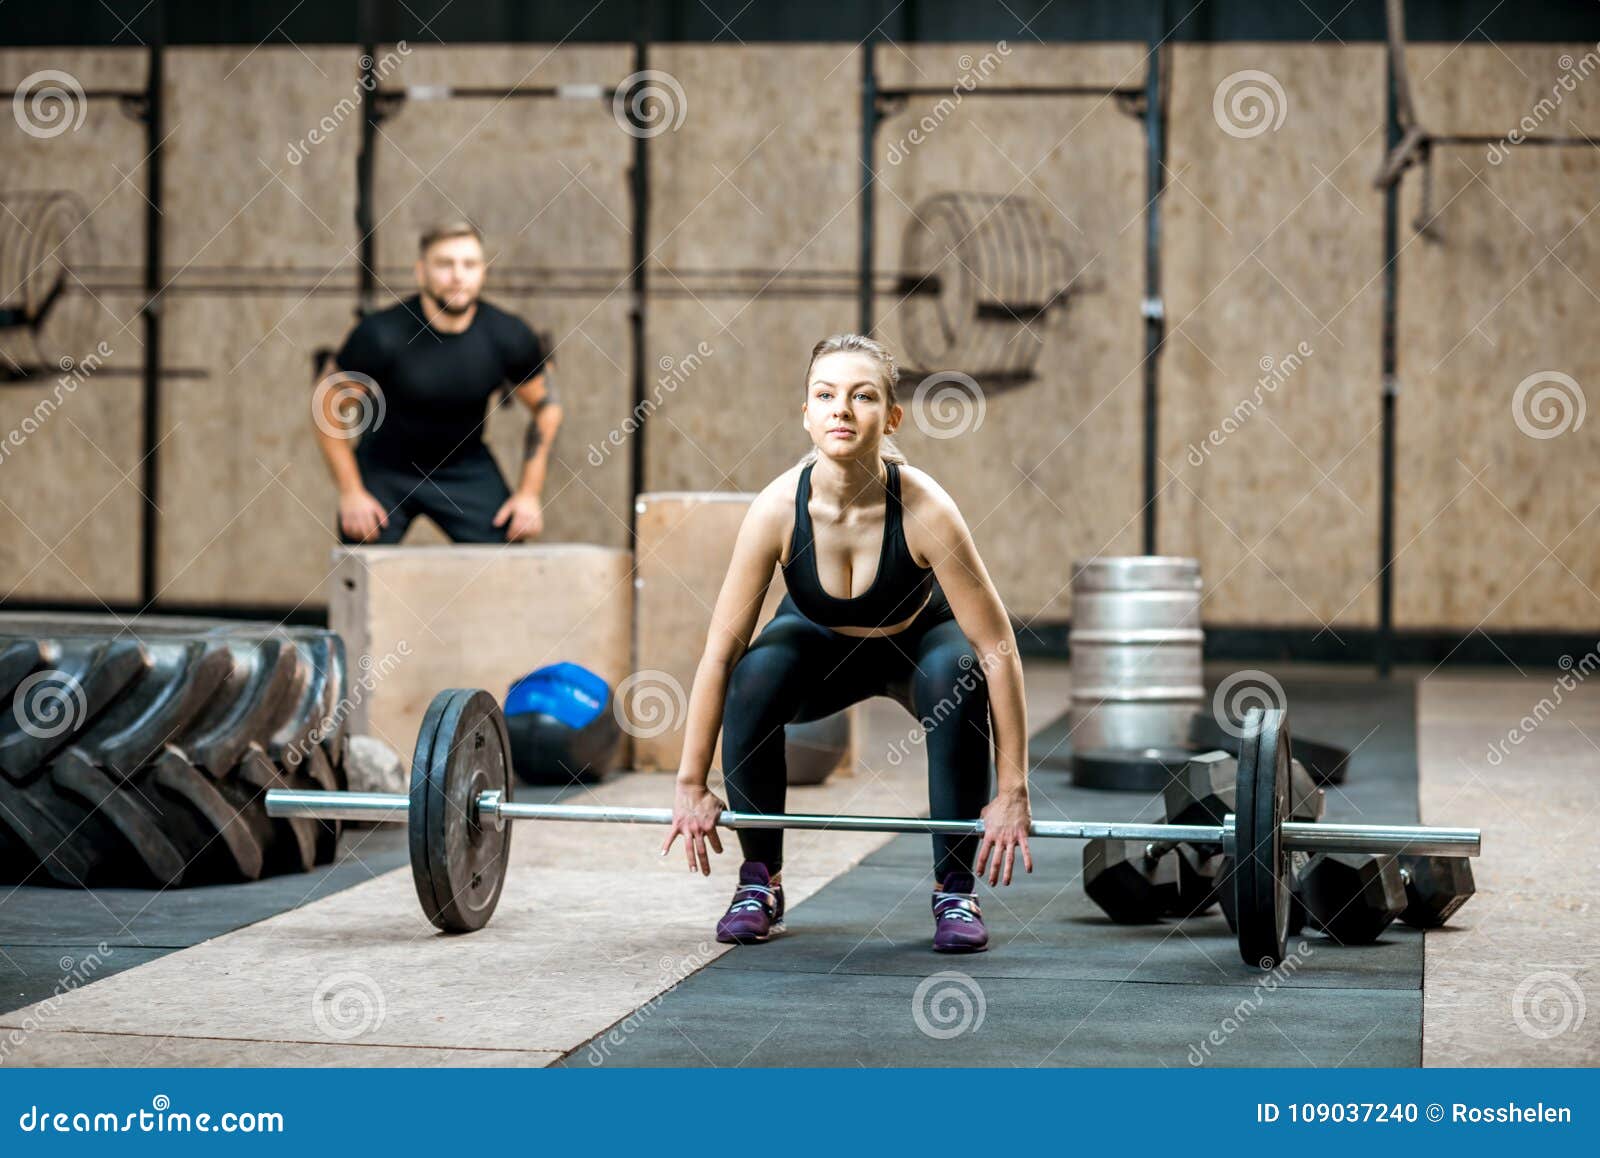 Woman Lifting Up a Burbell in the Gym Stock Photo - Image of sportswear ...